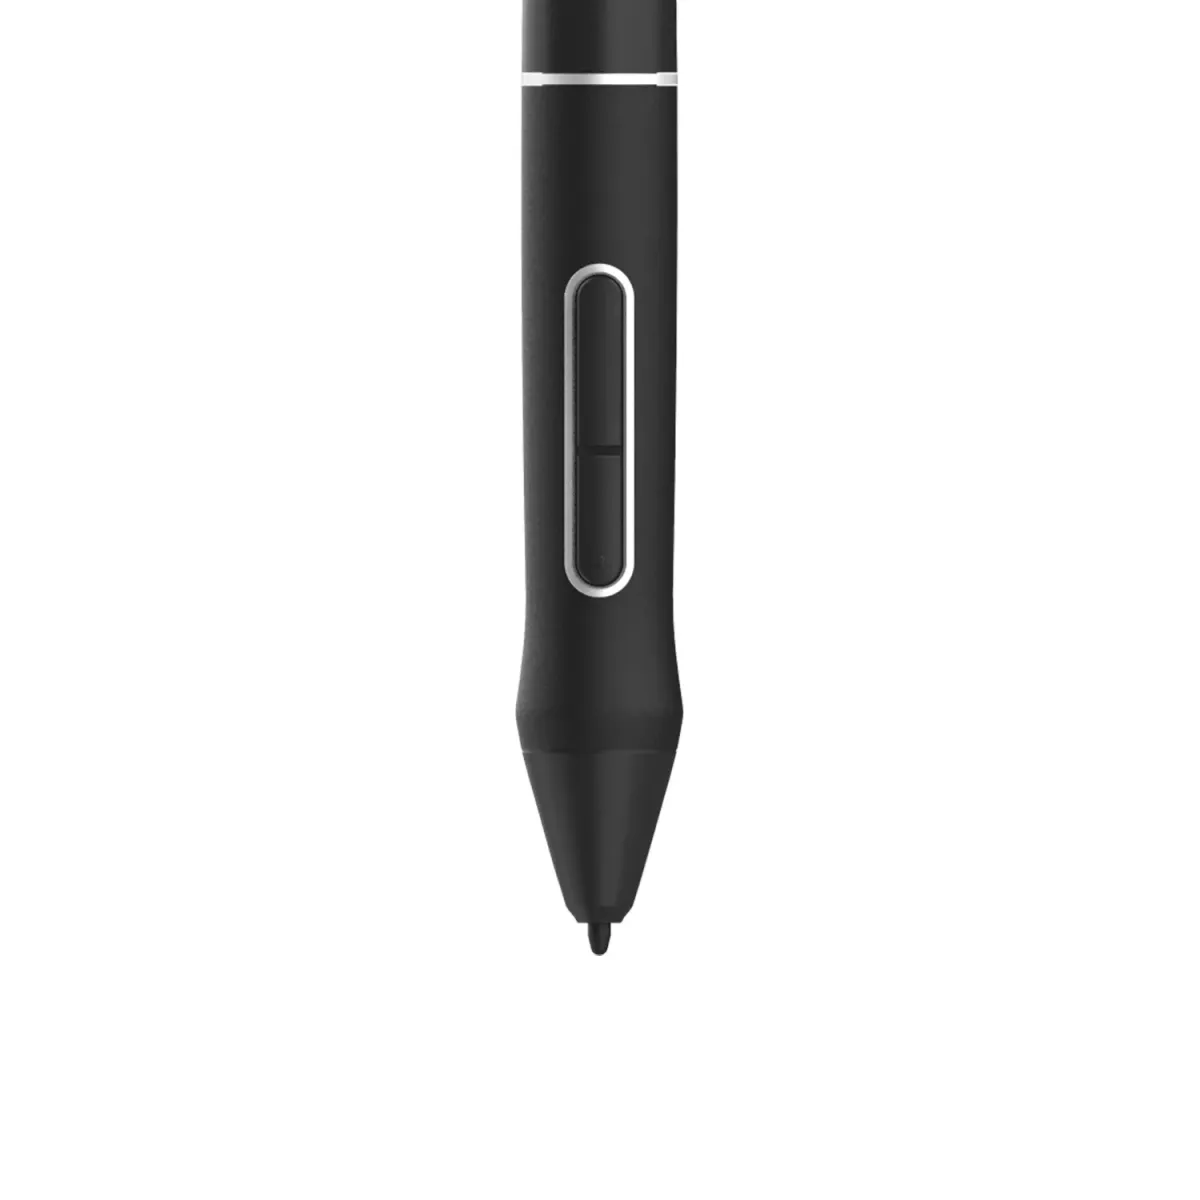 Kamvas 12 Drawing Pen Display for Beginners | Huion Official Store